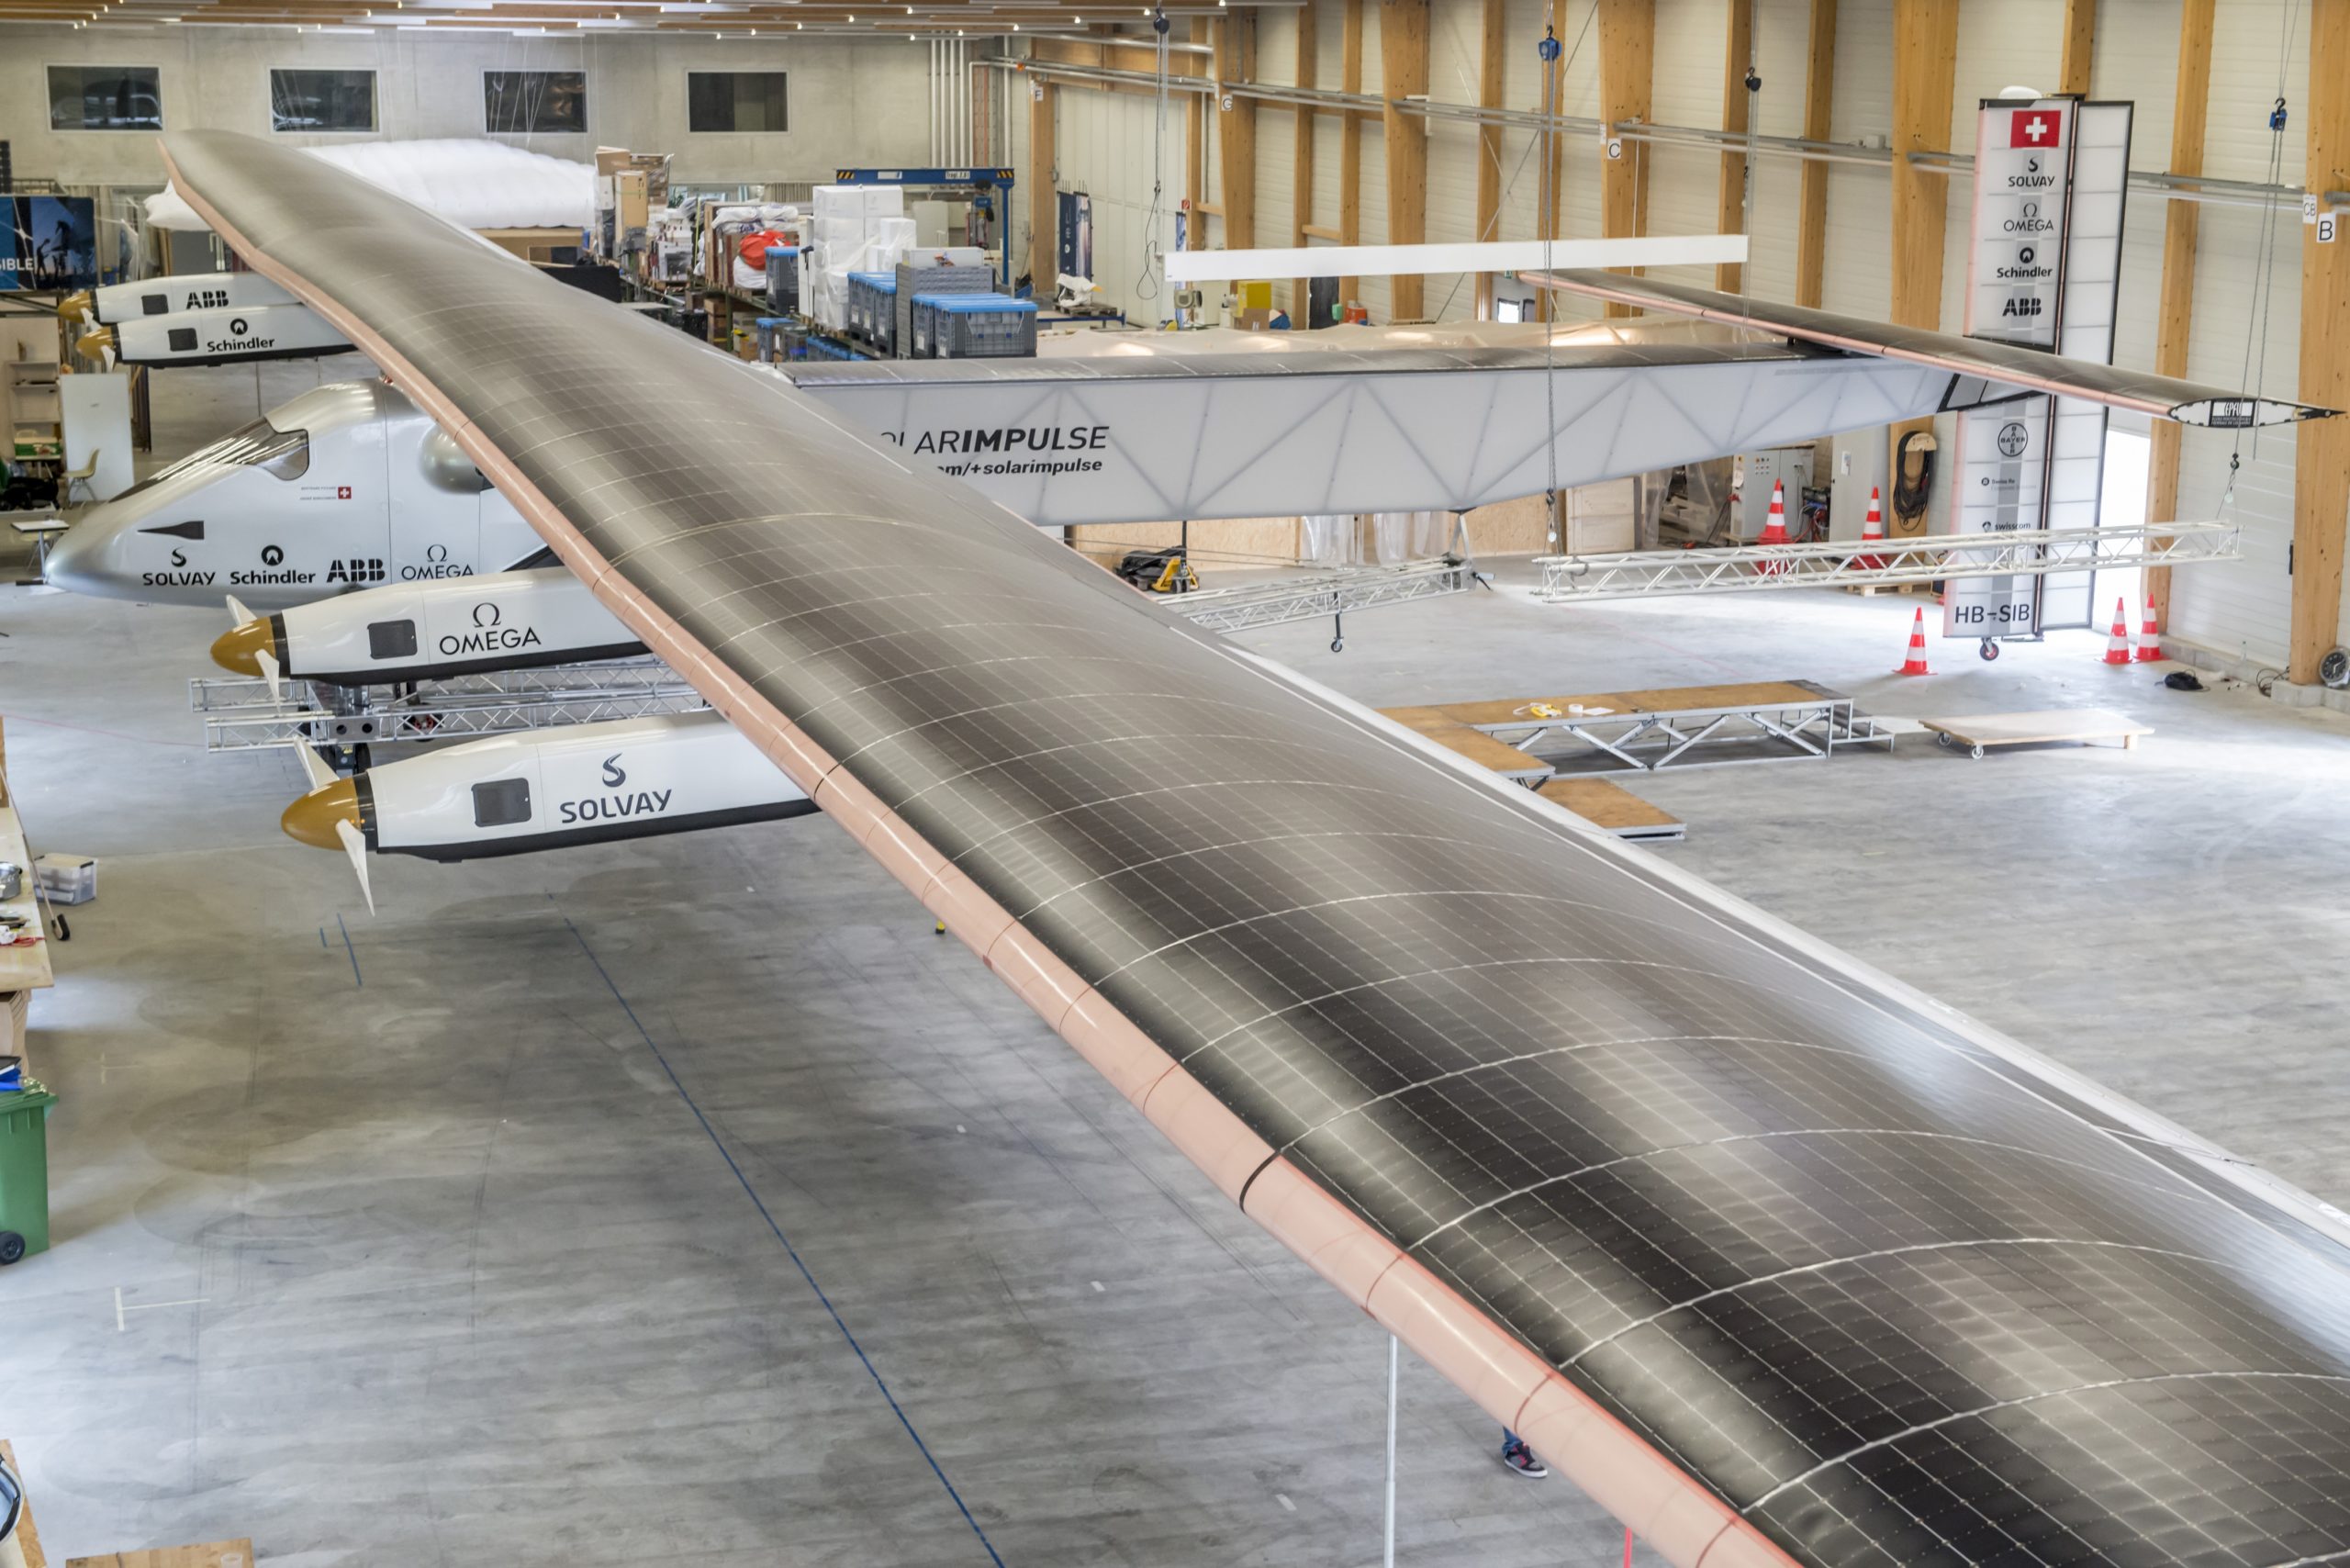 This Plane Will Circle The World Using Only The Power Of The Sun